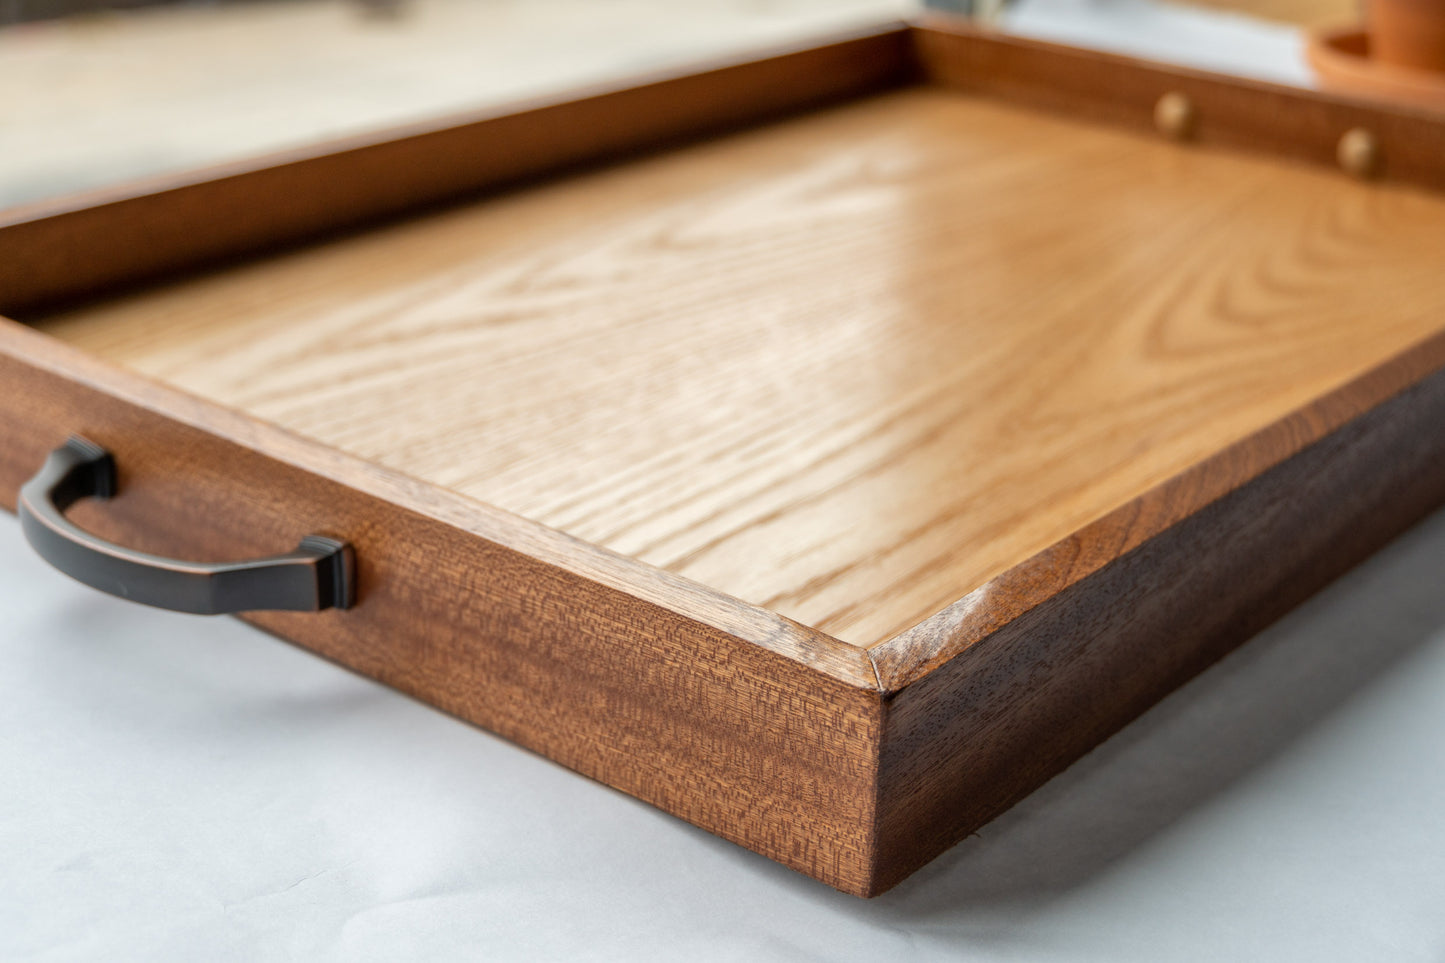 A side view of our Luxury Serving Tray. Mahogany wood forms the raised lip of the tray in an attractive dark brown grain. Inside, gleaming oak wood serves as the base. On either side of the tray a comfortable brass handle protrudes. The tray sits on a white surface.